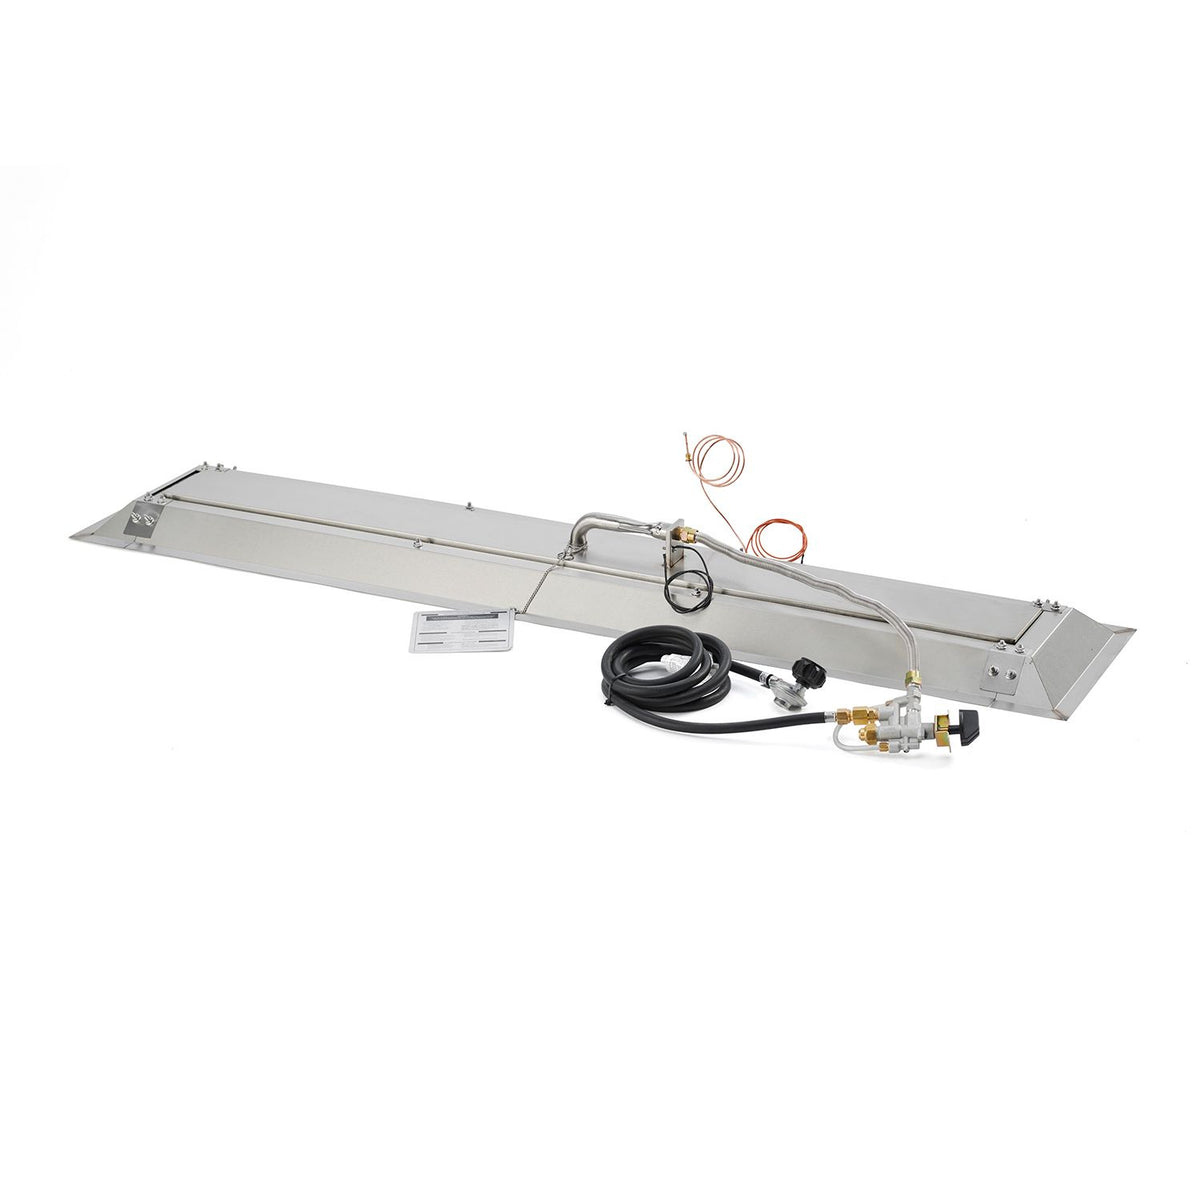 The Outdoor GreatRoom Linear Crystal Fire Plus Gas Burner